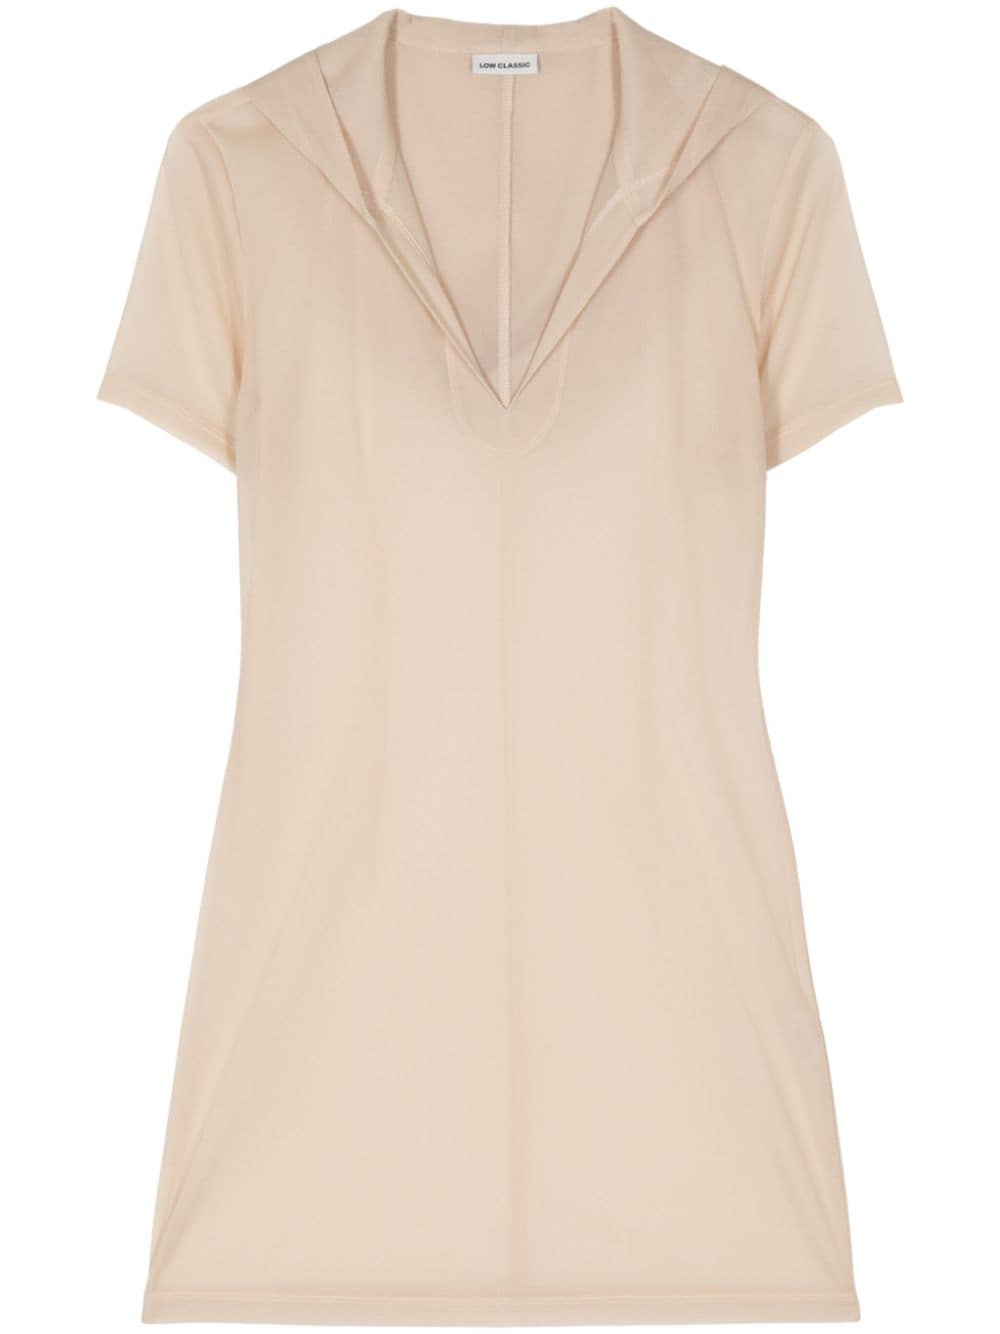 Low Classic Sheer Hooded Top In Neutral